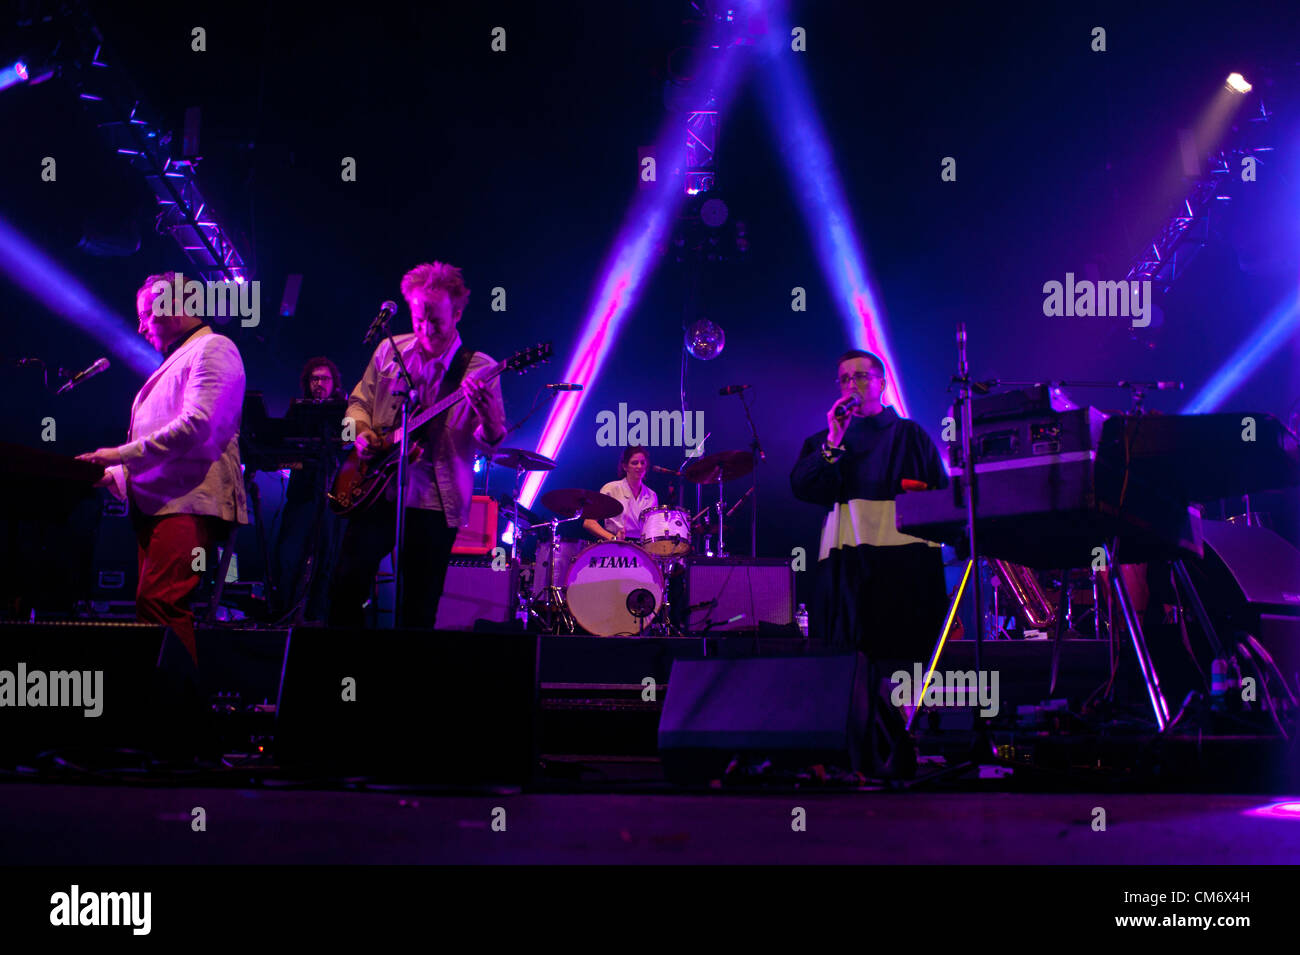 London, UK - 18 October 2012: Hot Chip perform live at O2 Academy Brixton following the release of their new album 'In Our Heads' Stock Photo